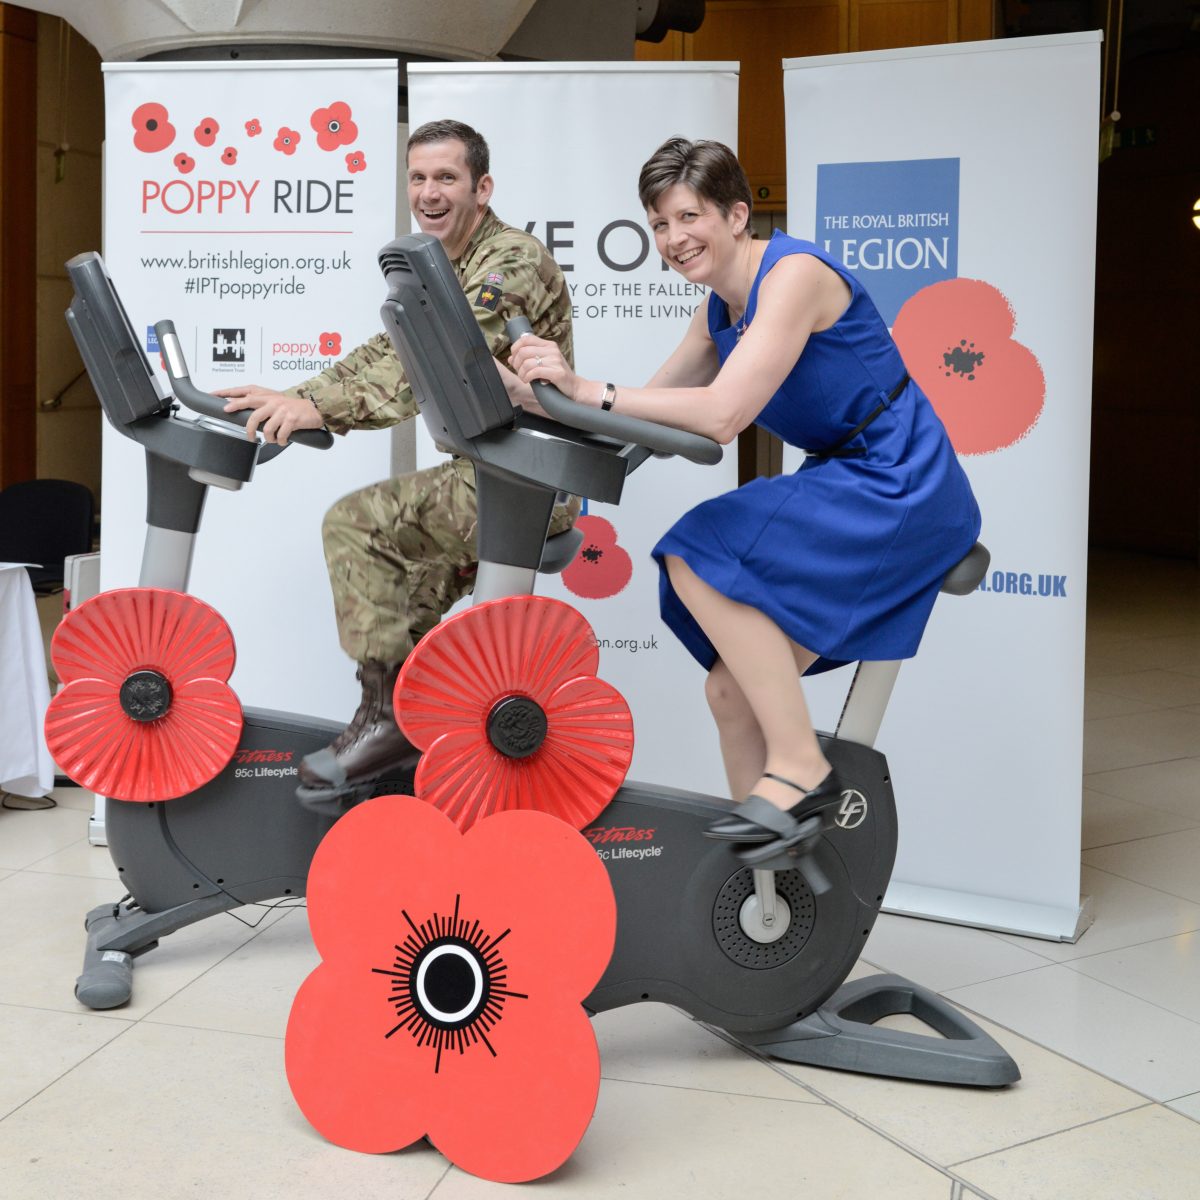 Alison Thewliss MP races against service personnel in support of The Royal British Legion’s Annual Poppy Appeal